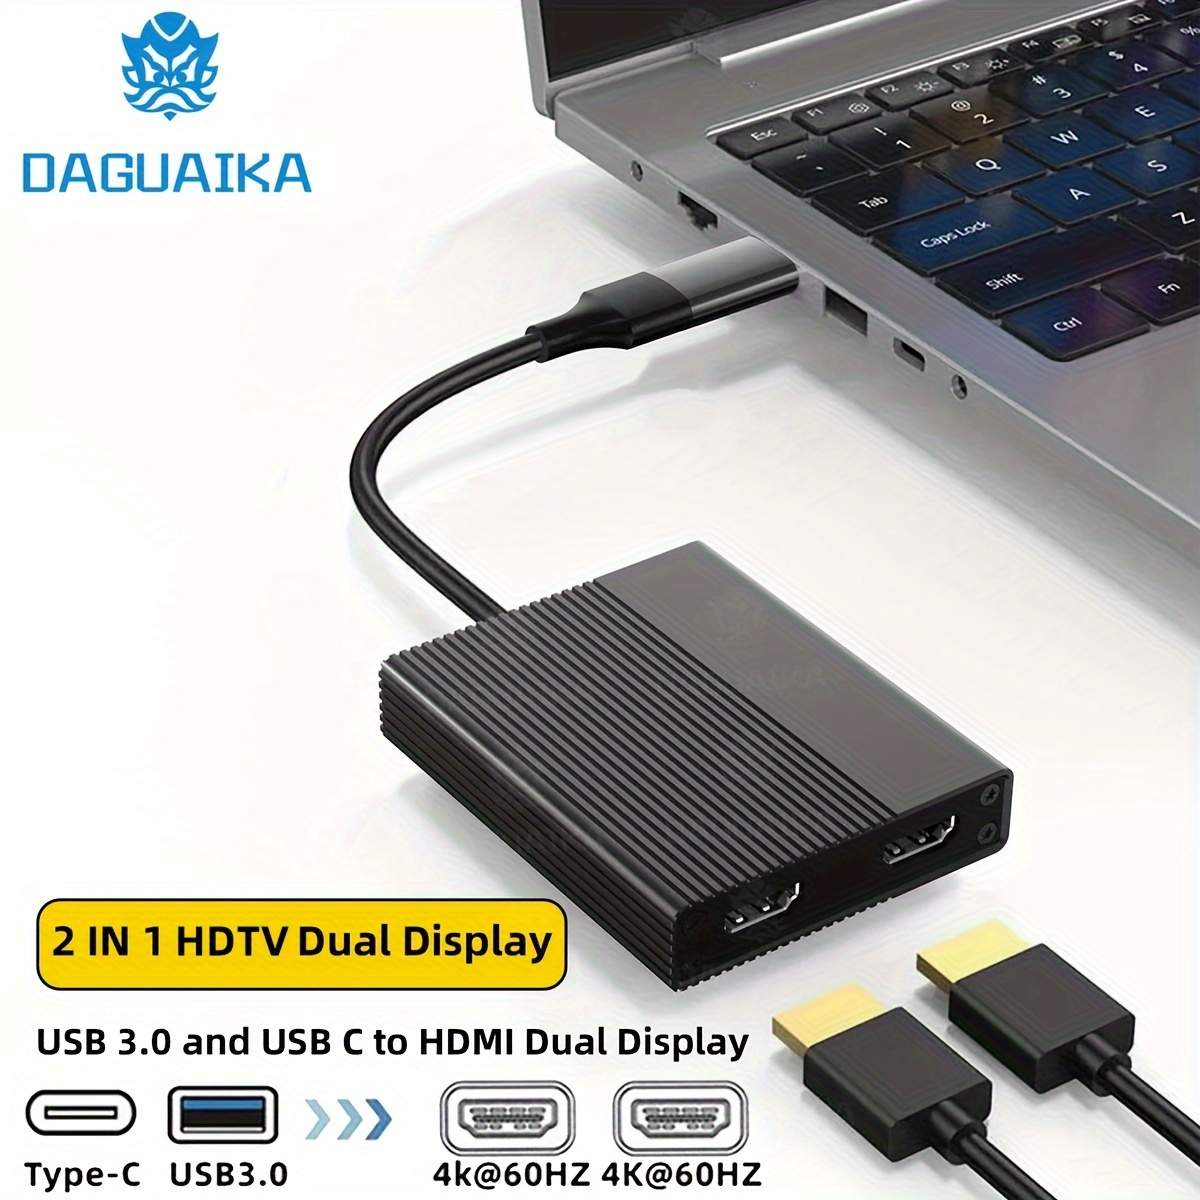 

4k 60hz Usb C/usb 3.0 To Dual Hdtv Dock Station Dl6950 Chip Compatible With Windows M1/m2 Android Chrome